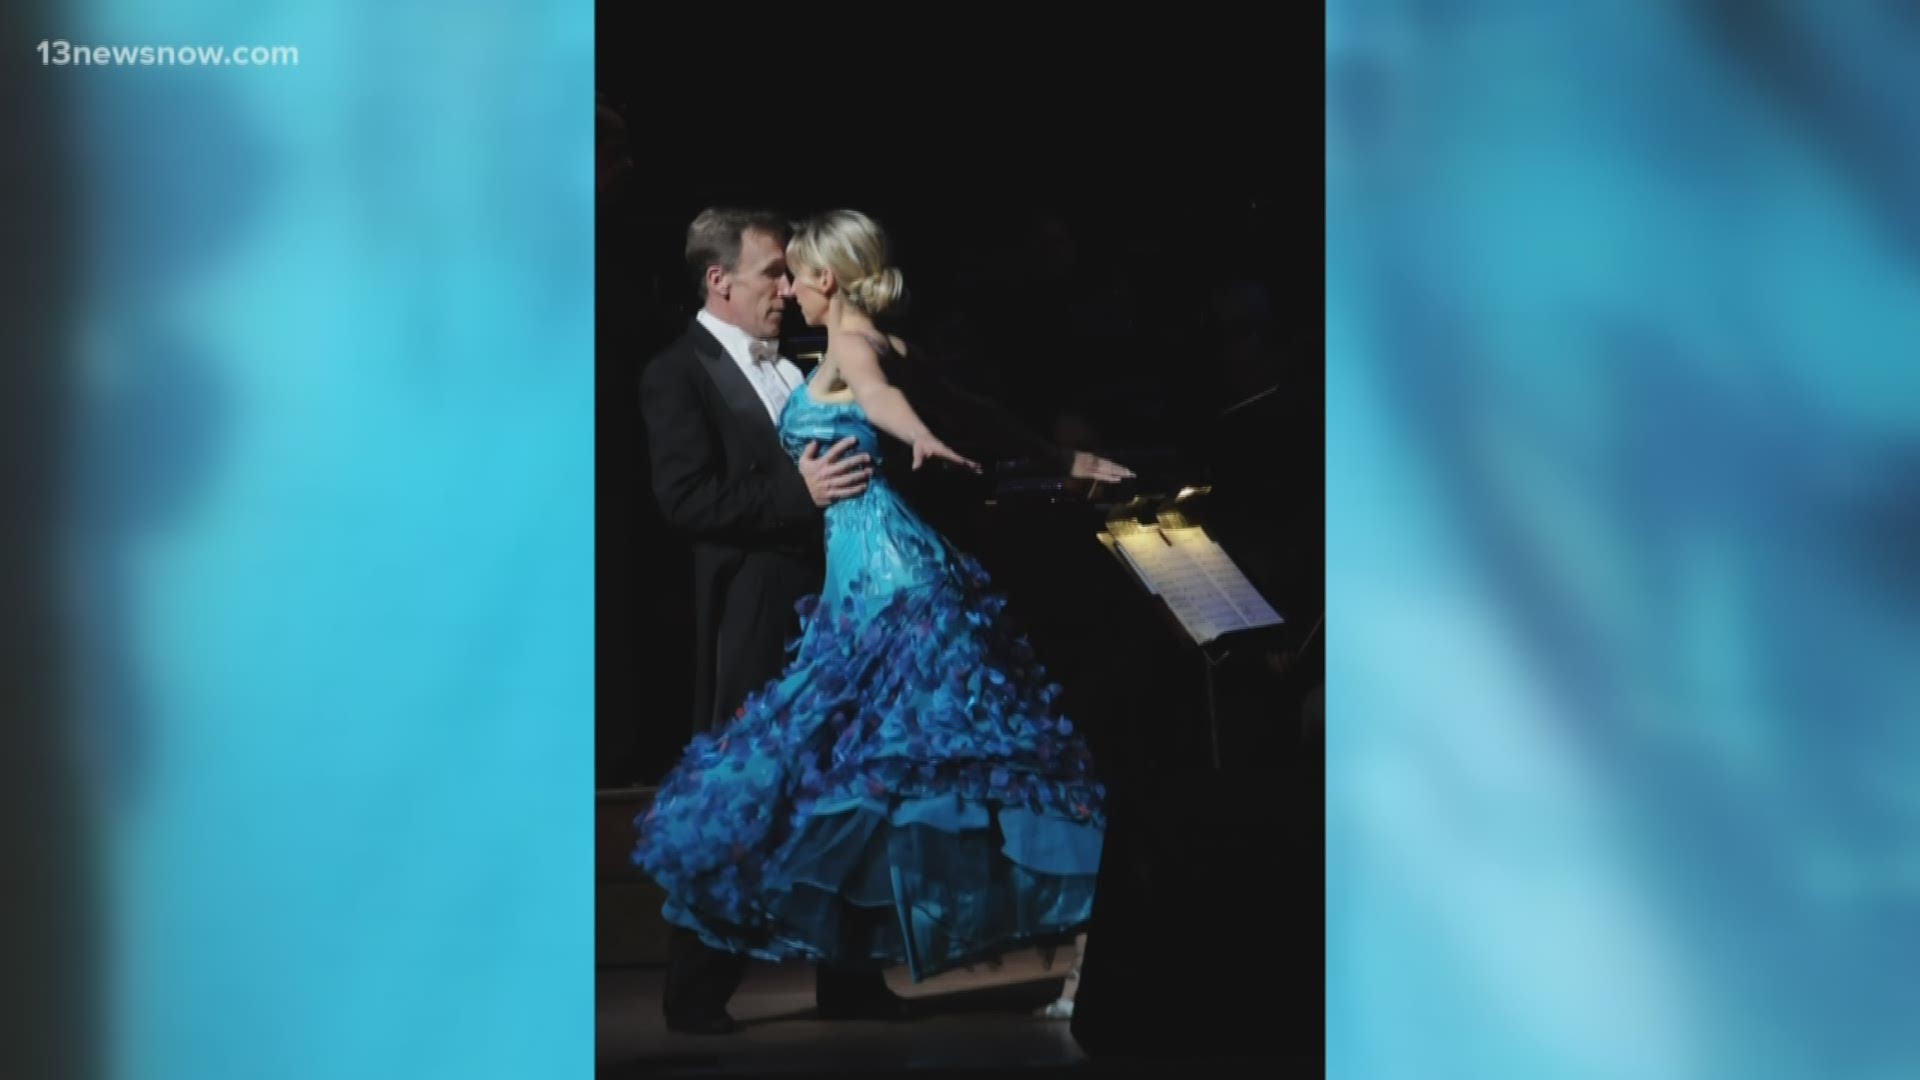 13News Now Dan Kennedy sat down with two people starring in a Virginia Symphony show that's perfect for Valentine's Day.